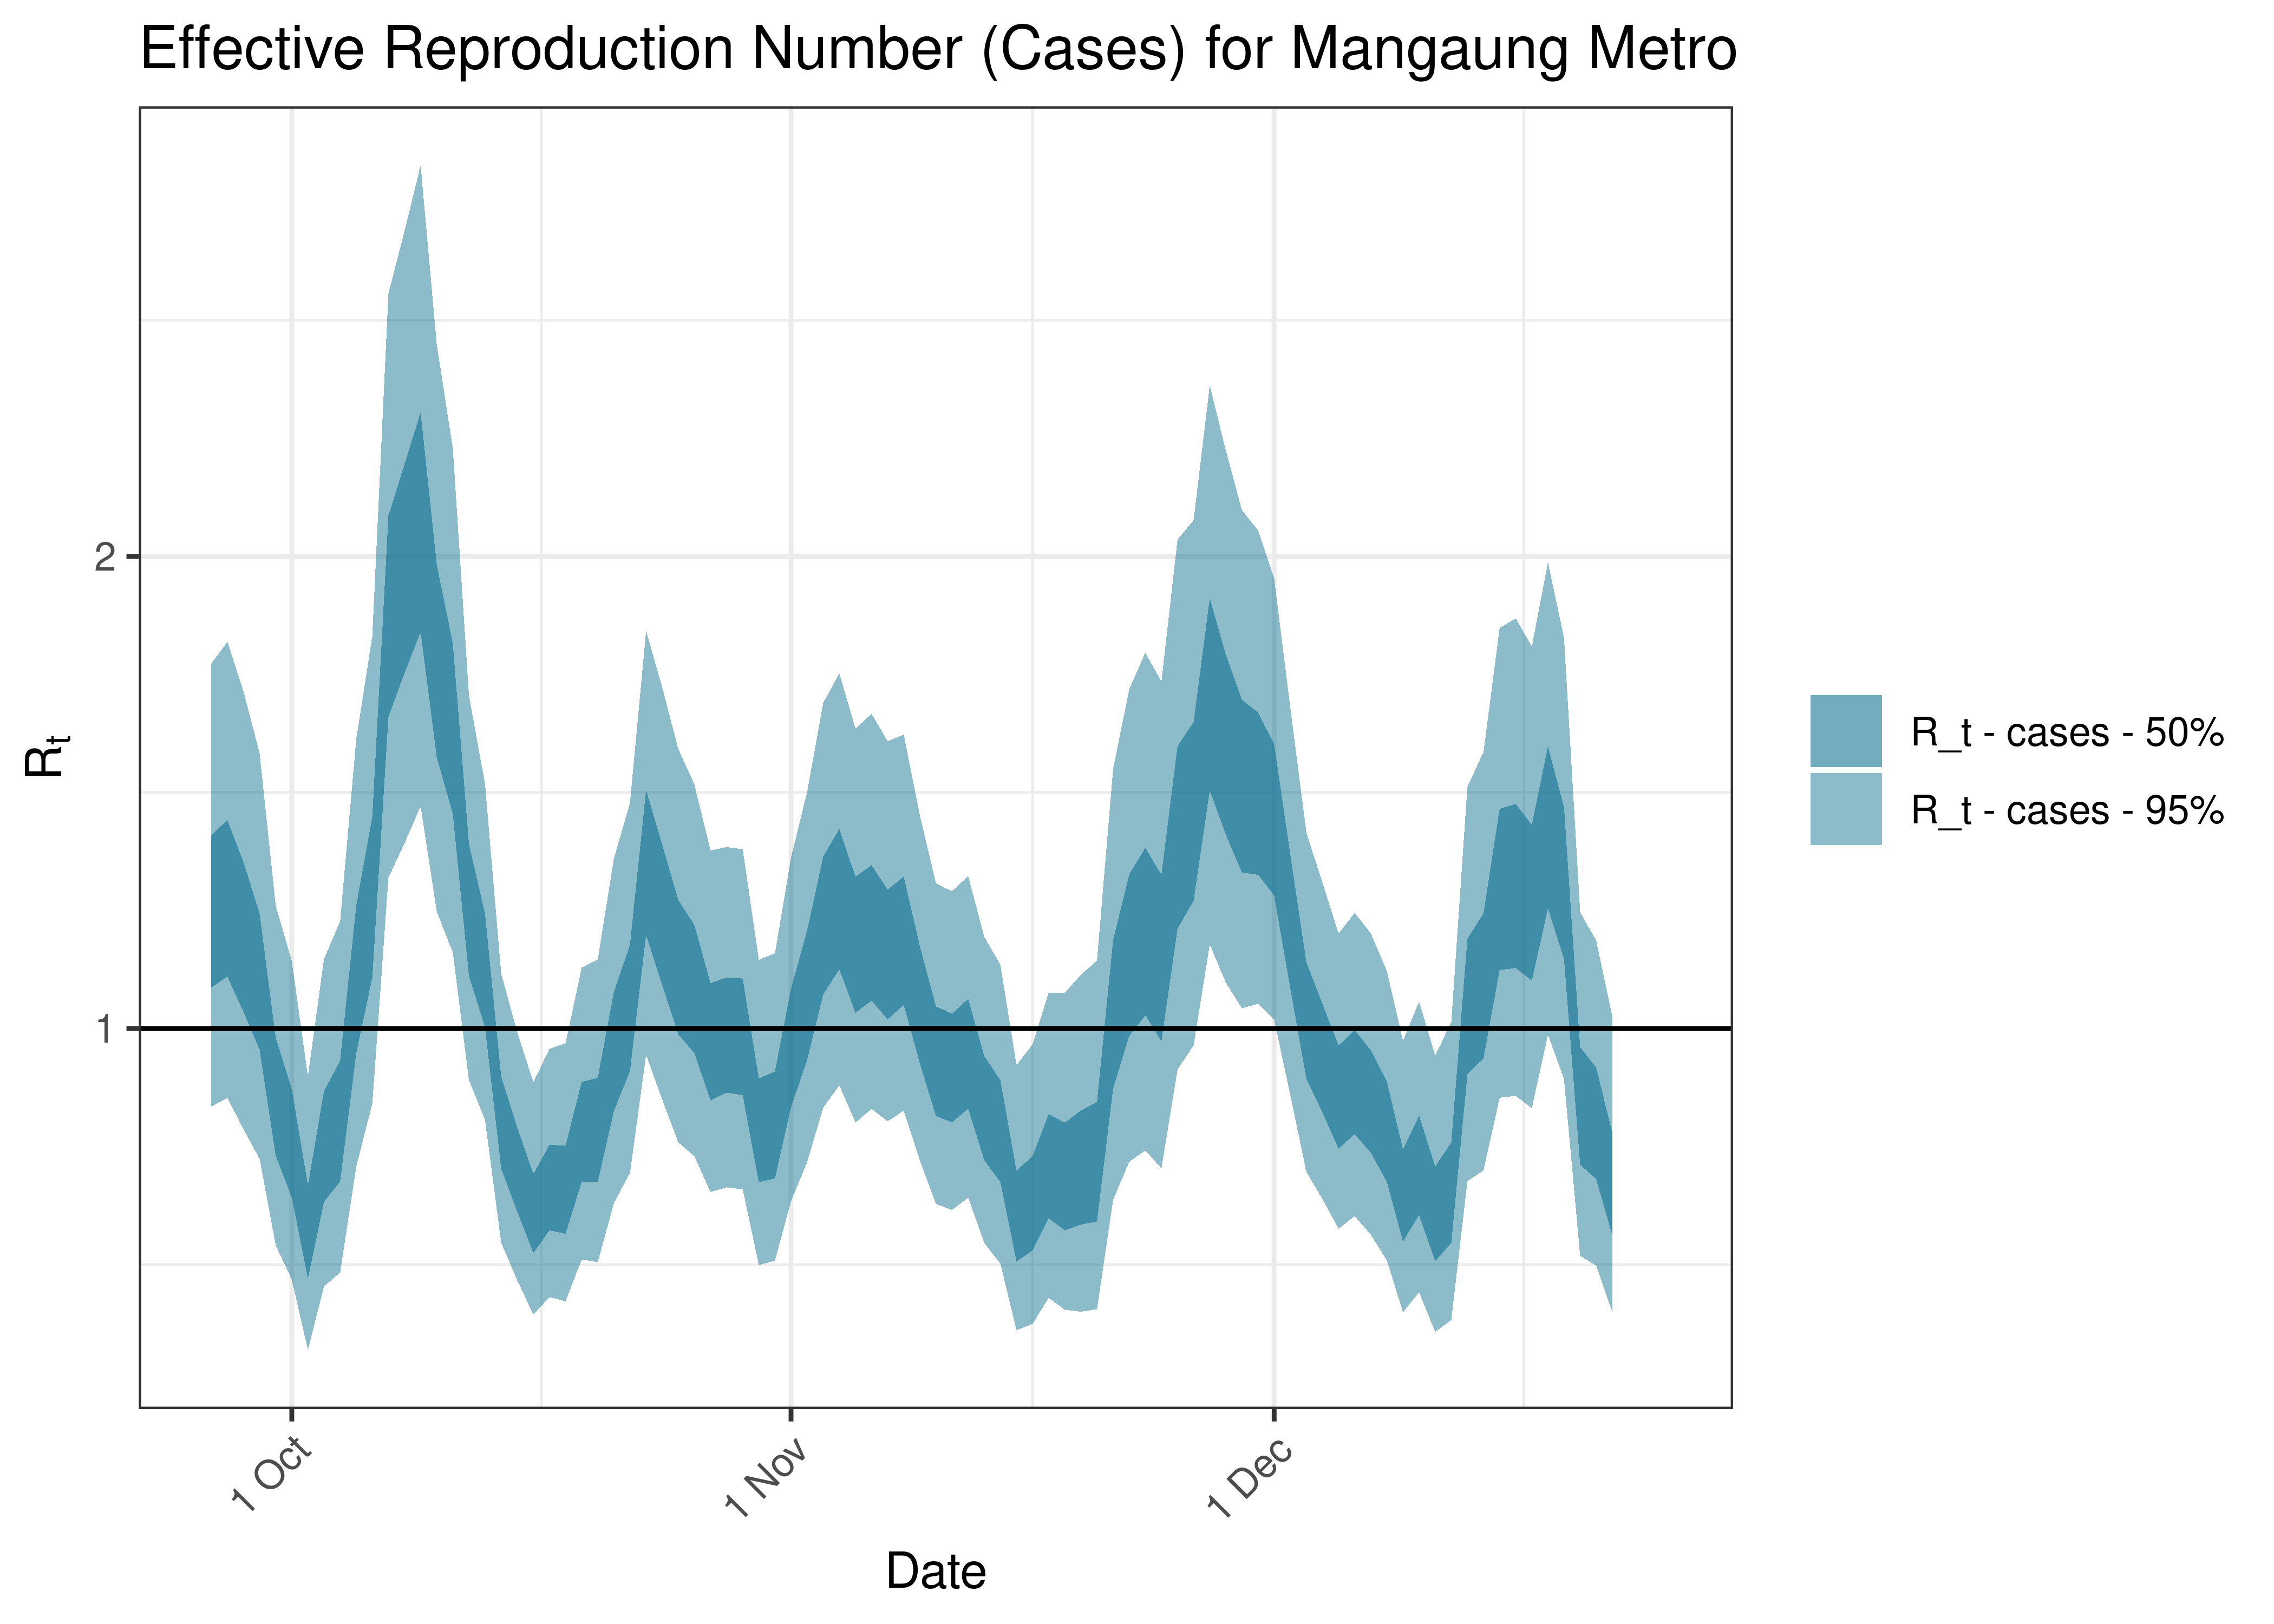 Estimated Effective Reproduction Number Based on Cases for Mangaung Metro over last 90 days